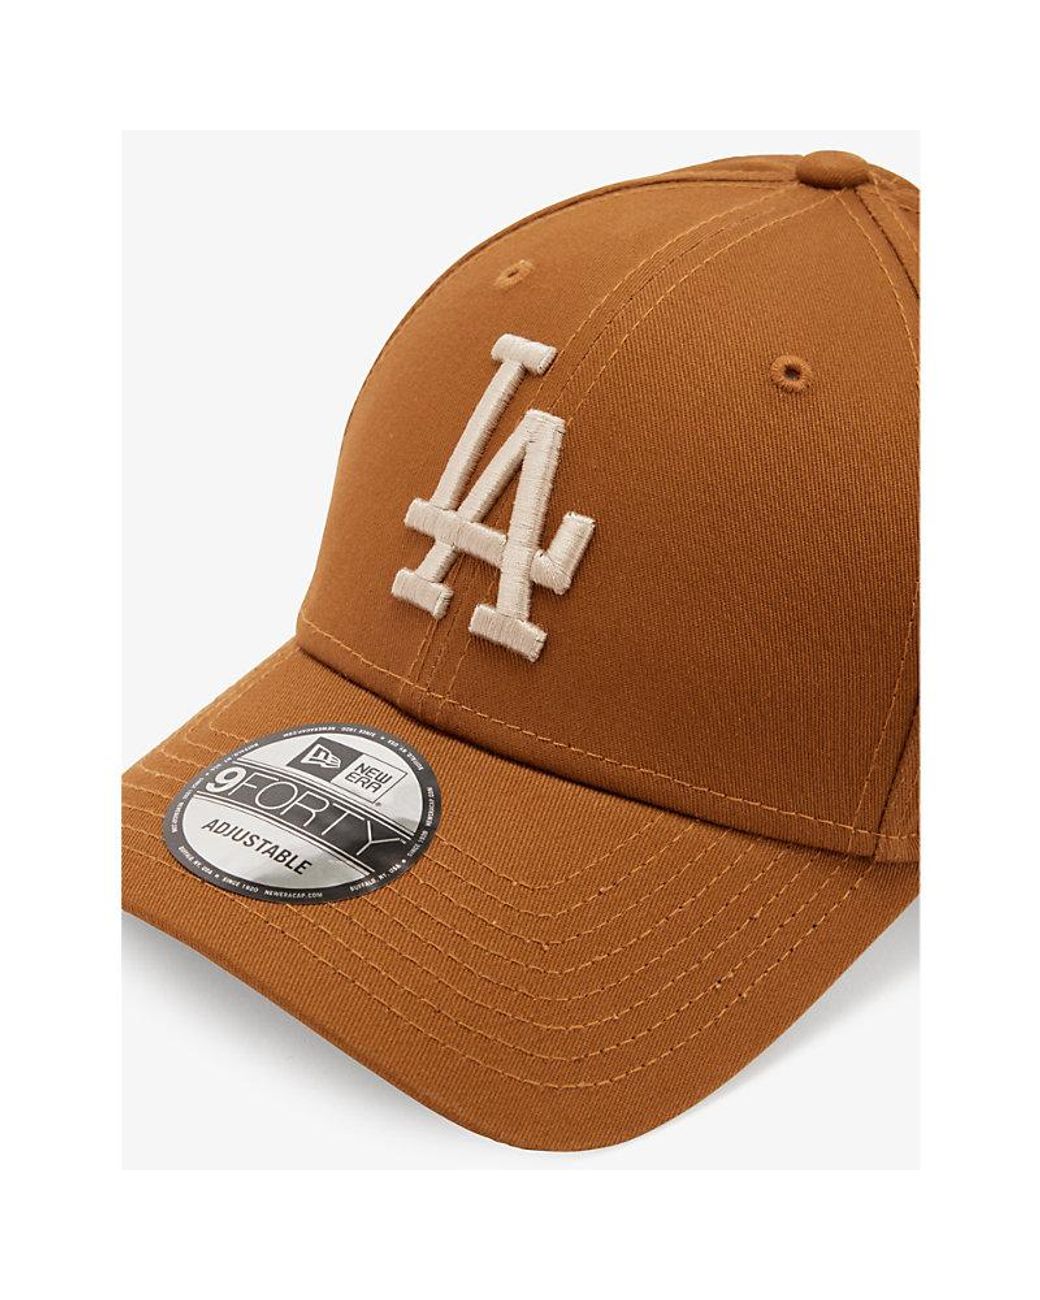 Los Angeles Clippers A-frame 9 forty New Era cap